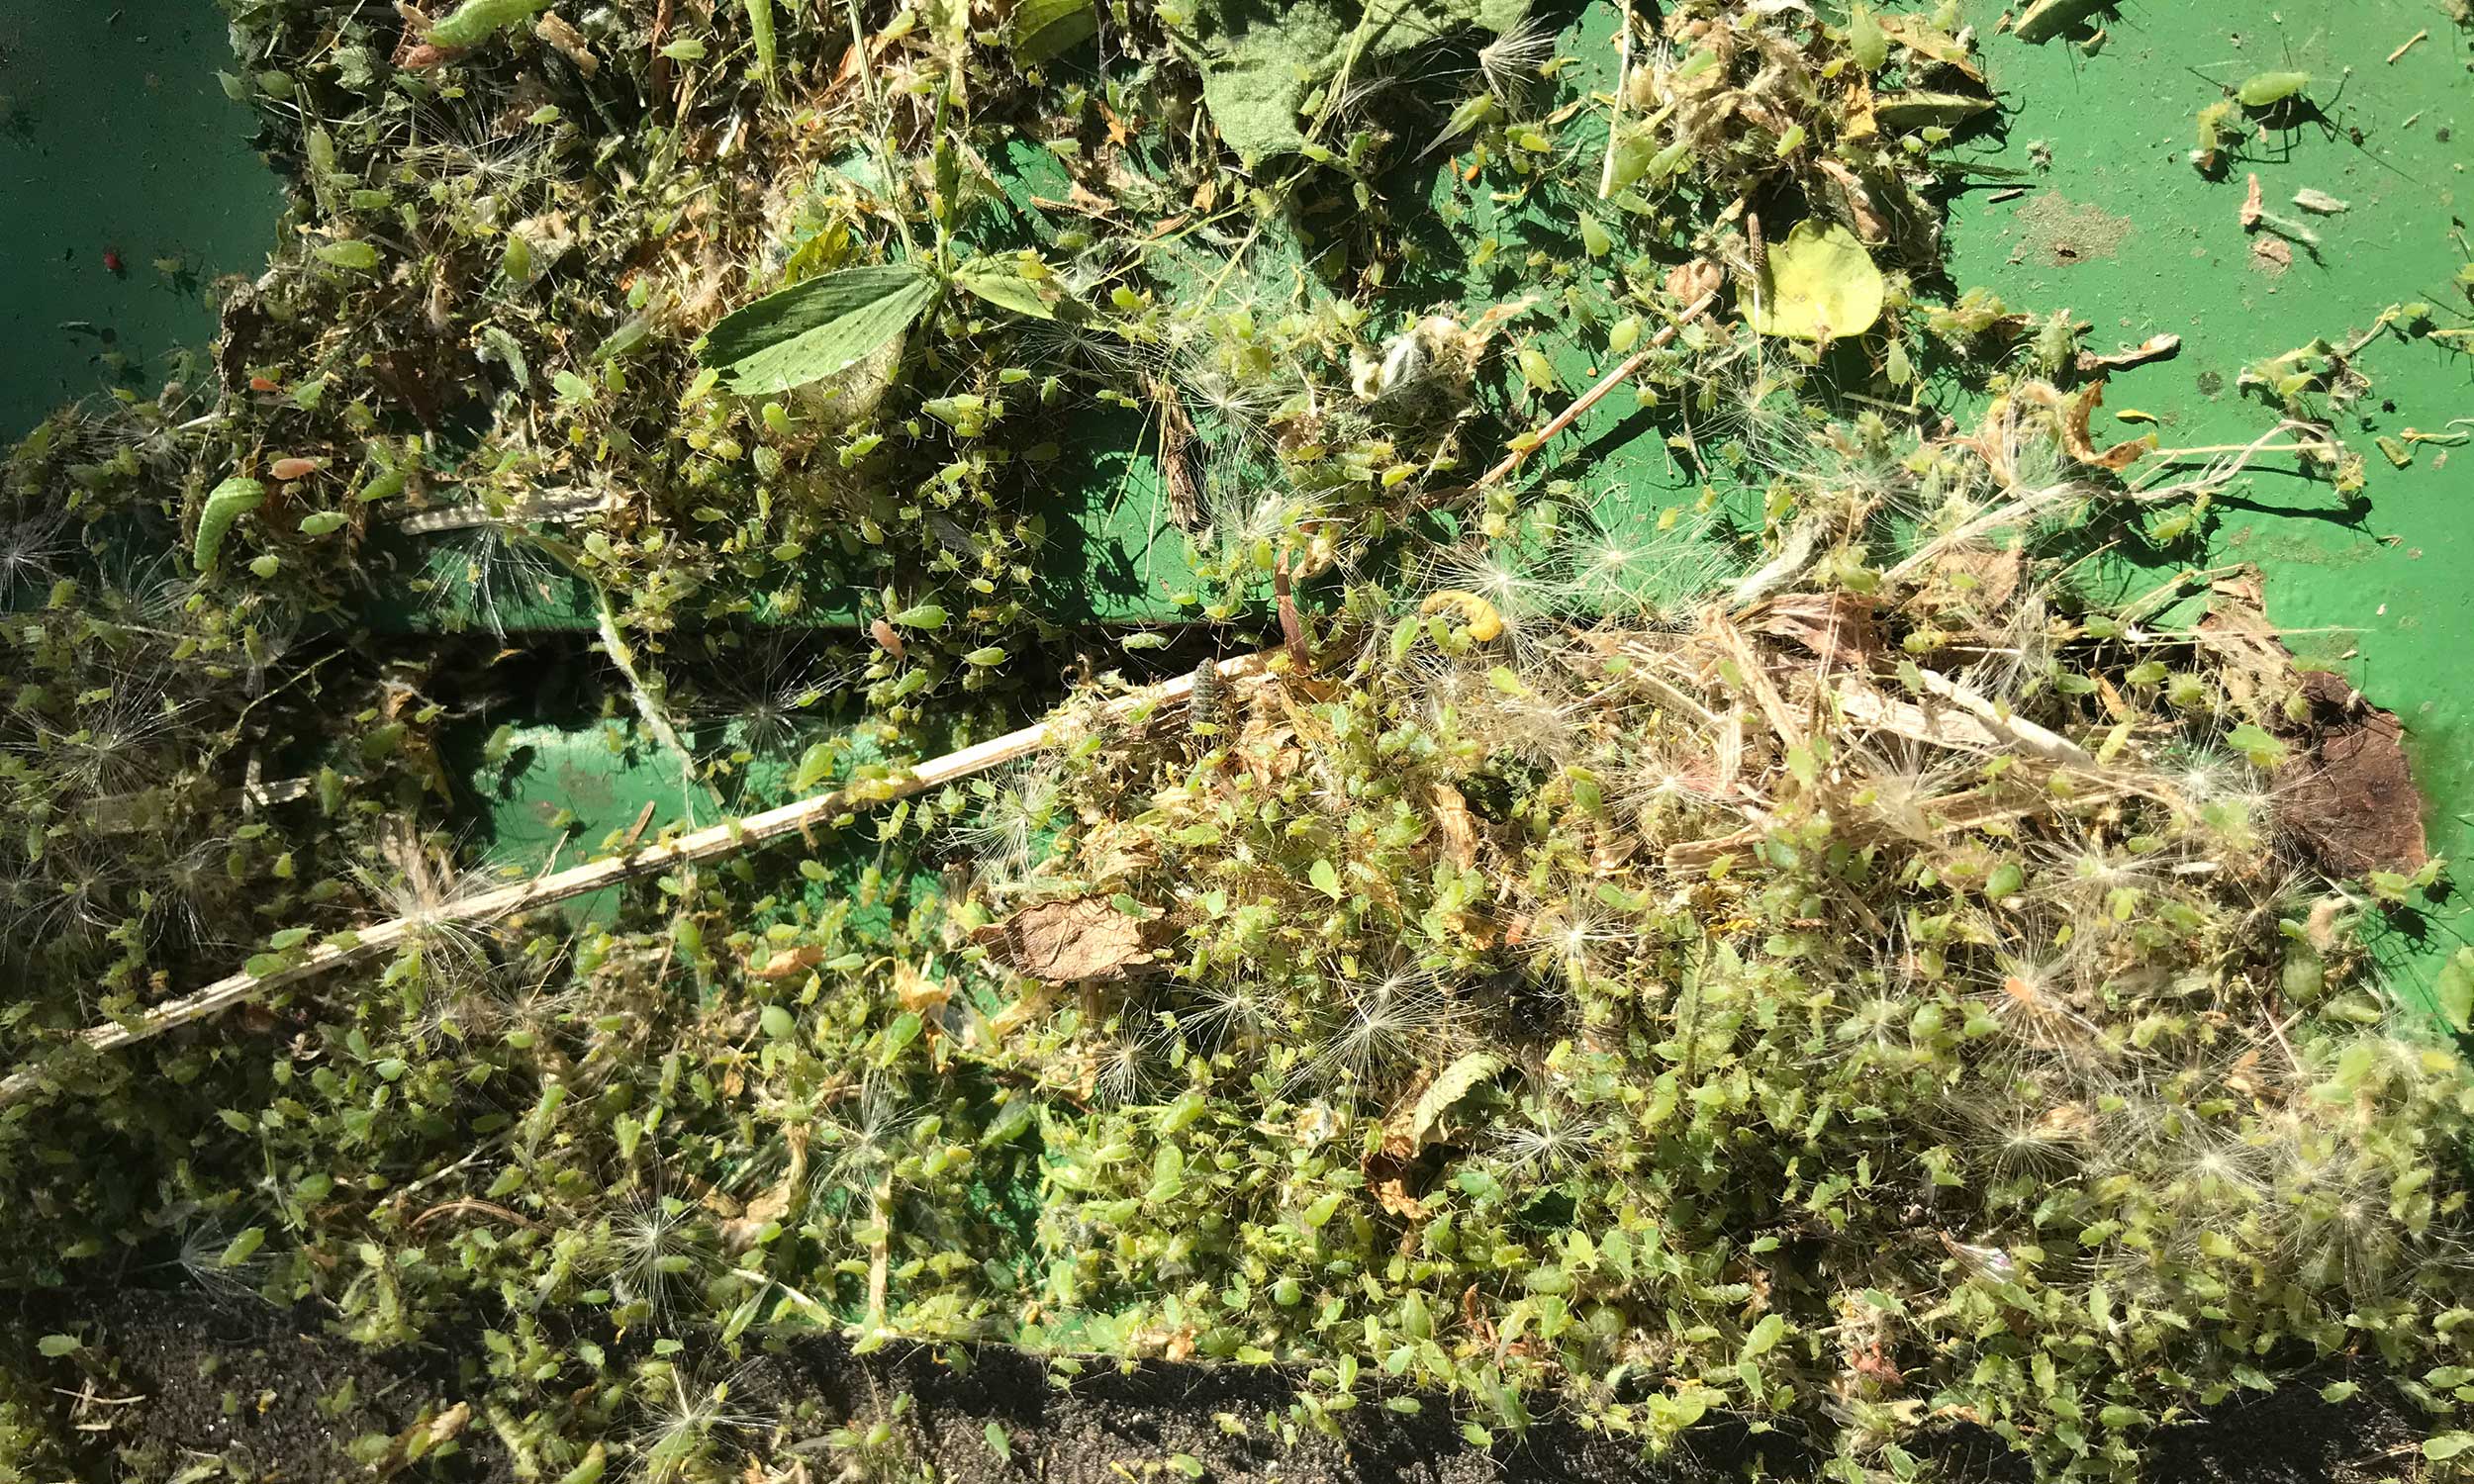 Large mass of small green insects and plant debris present on green implement.